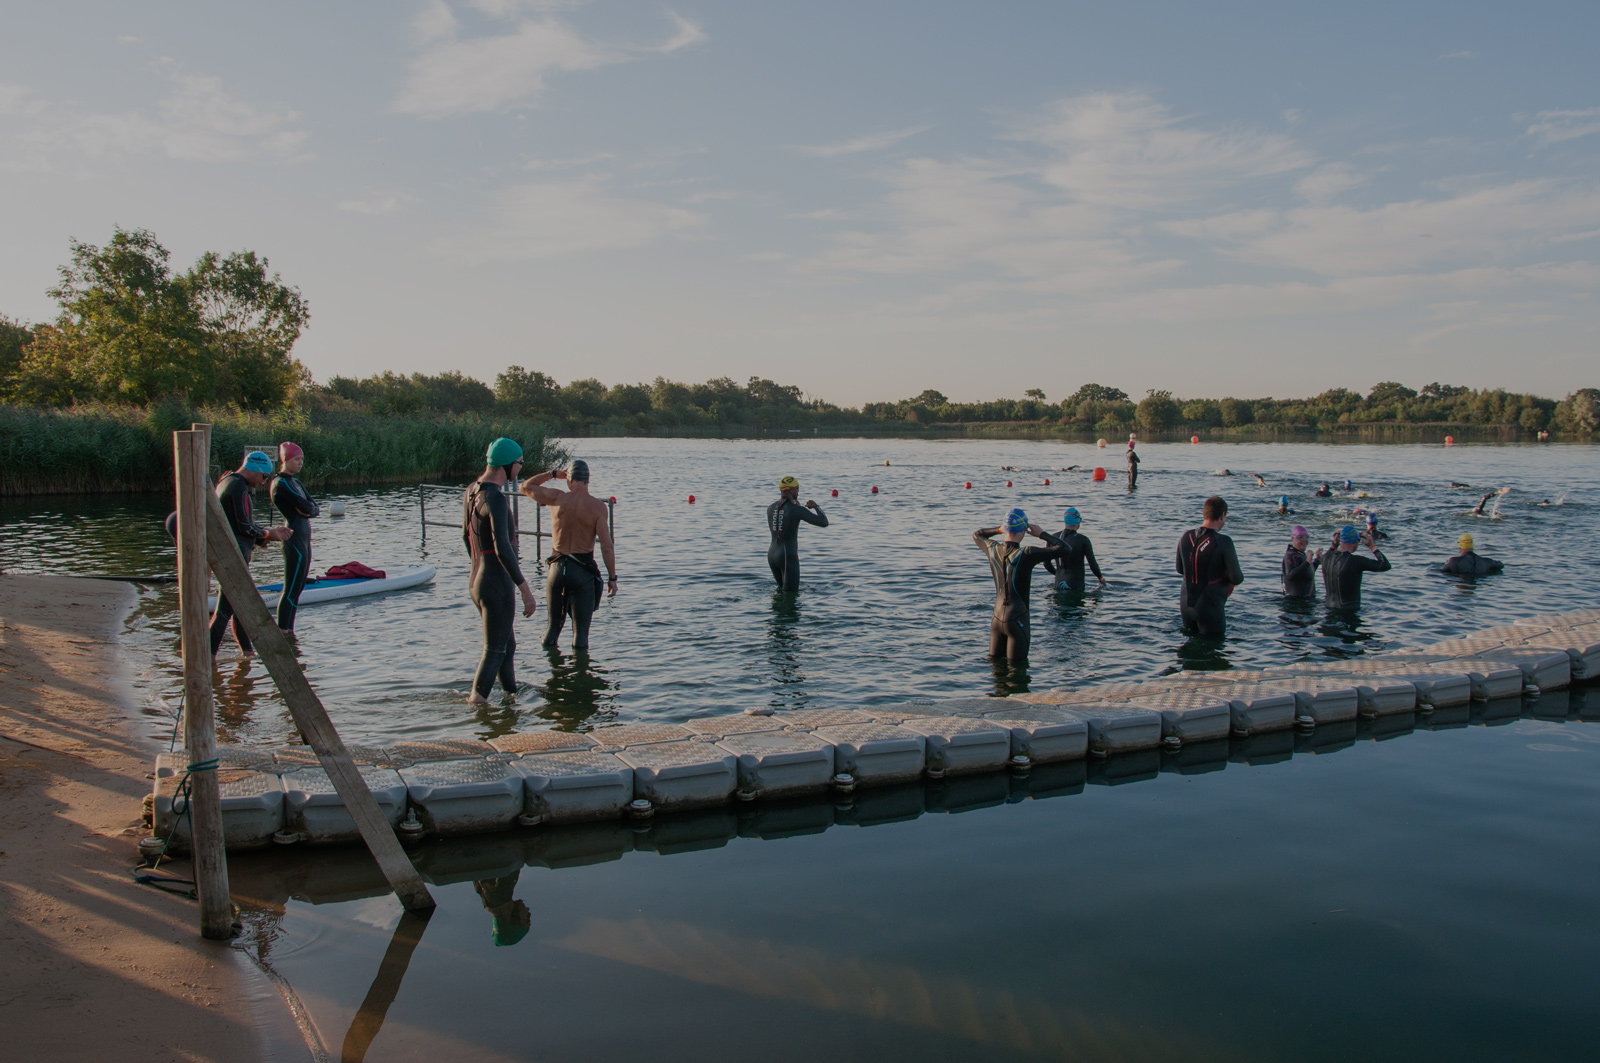 Swimmers entering the lake for open water swimming